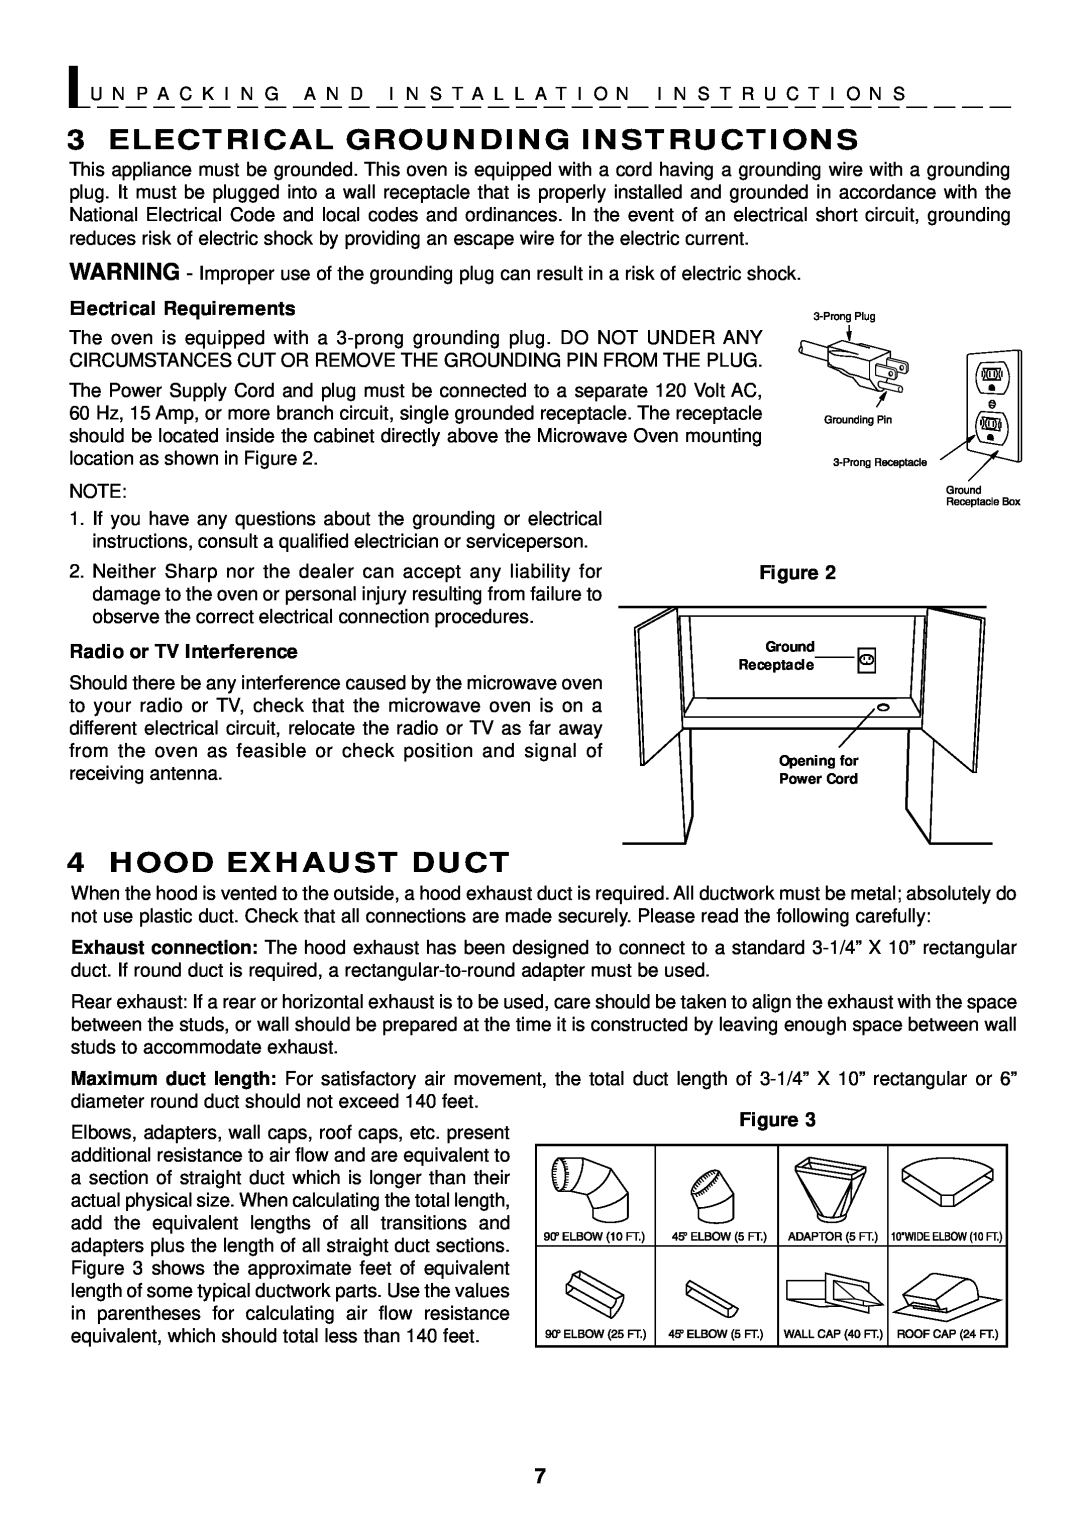 Sharp R-1501 manual Electrical Grounding Instructions, Hood Exhaust Duct, Electrical Requirements, Radio or TV Interference 